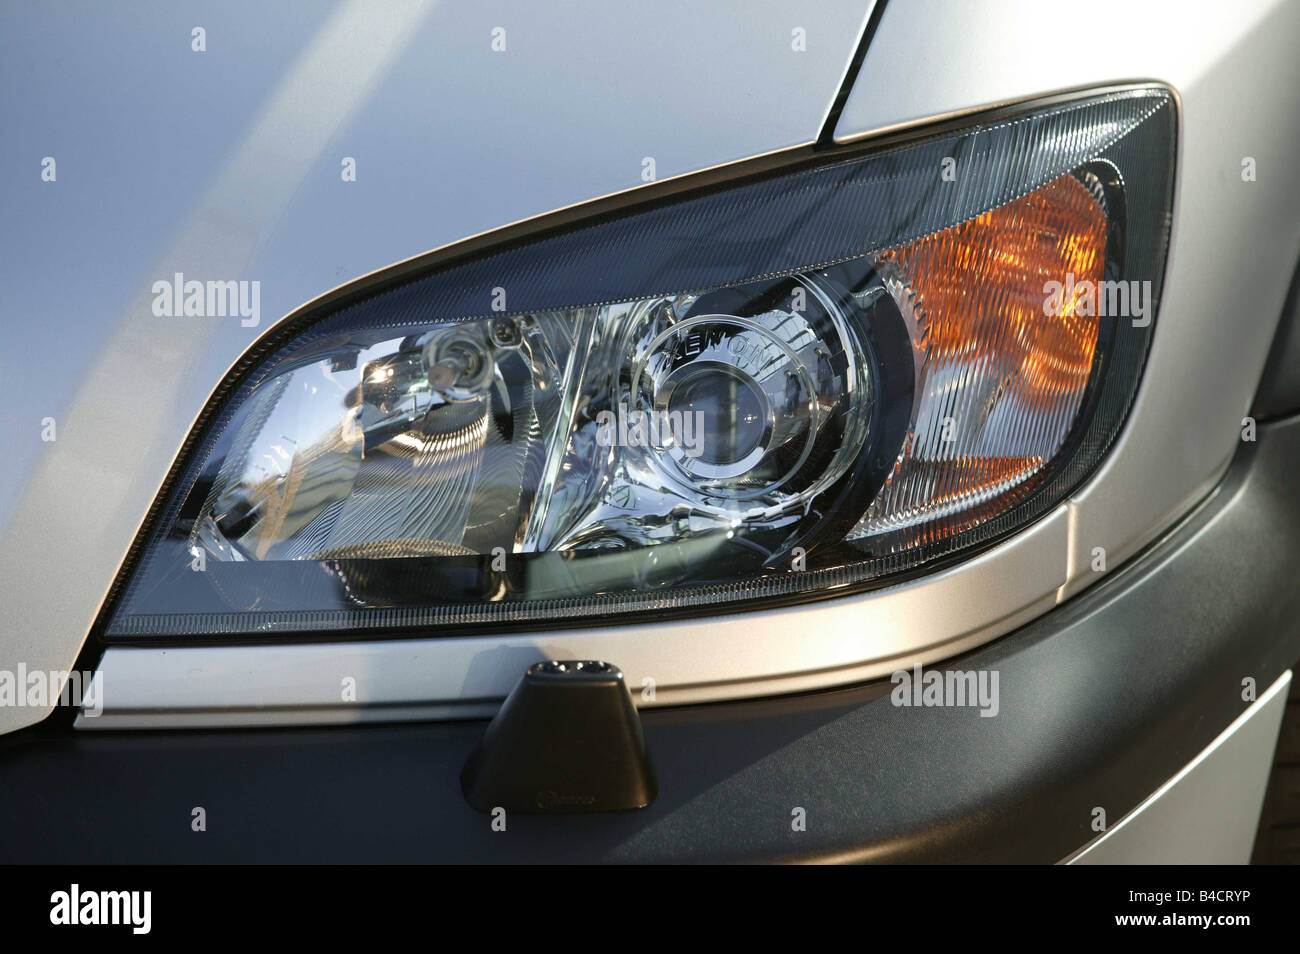 Opel zafira 2 2 stock photography and images